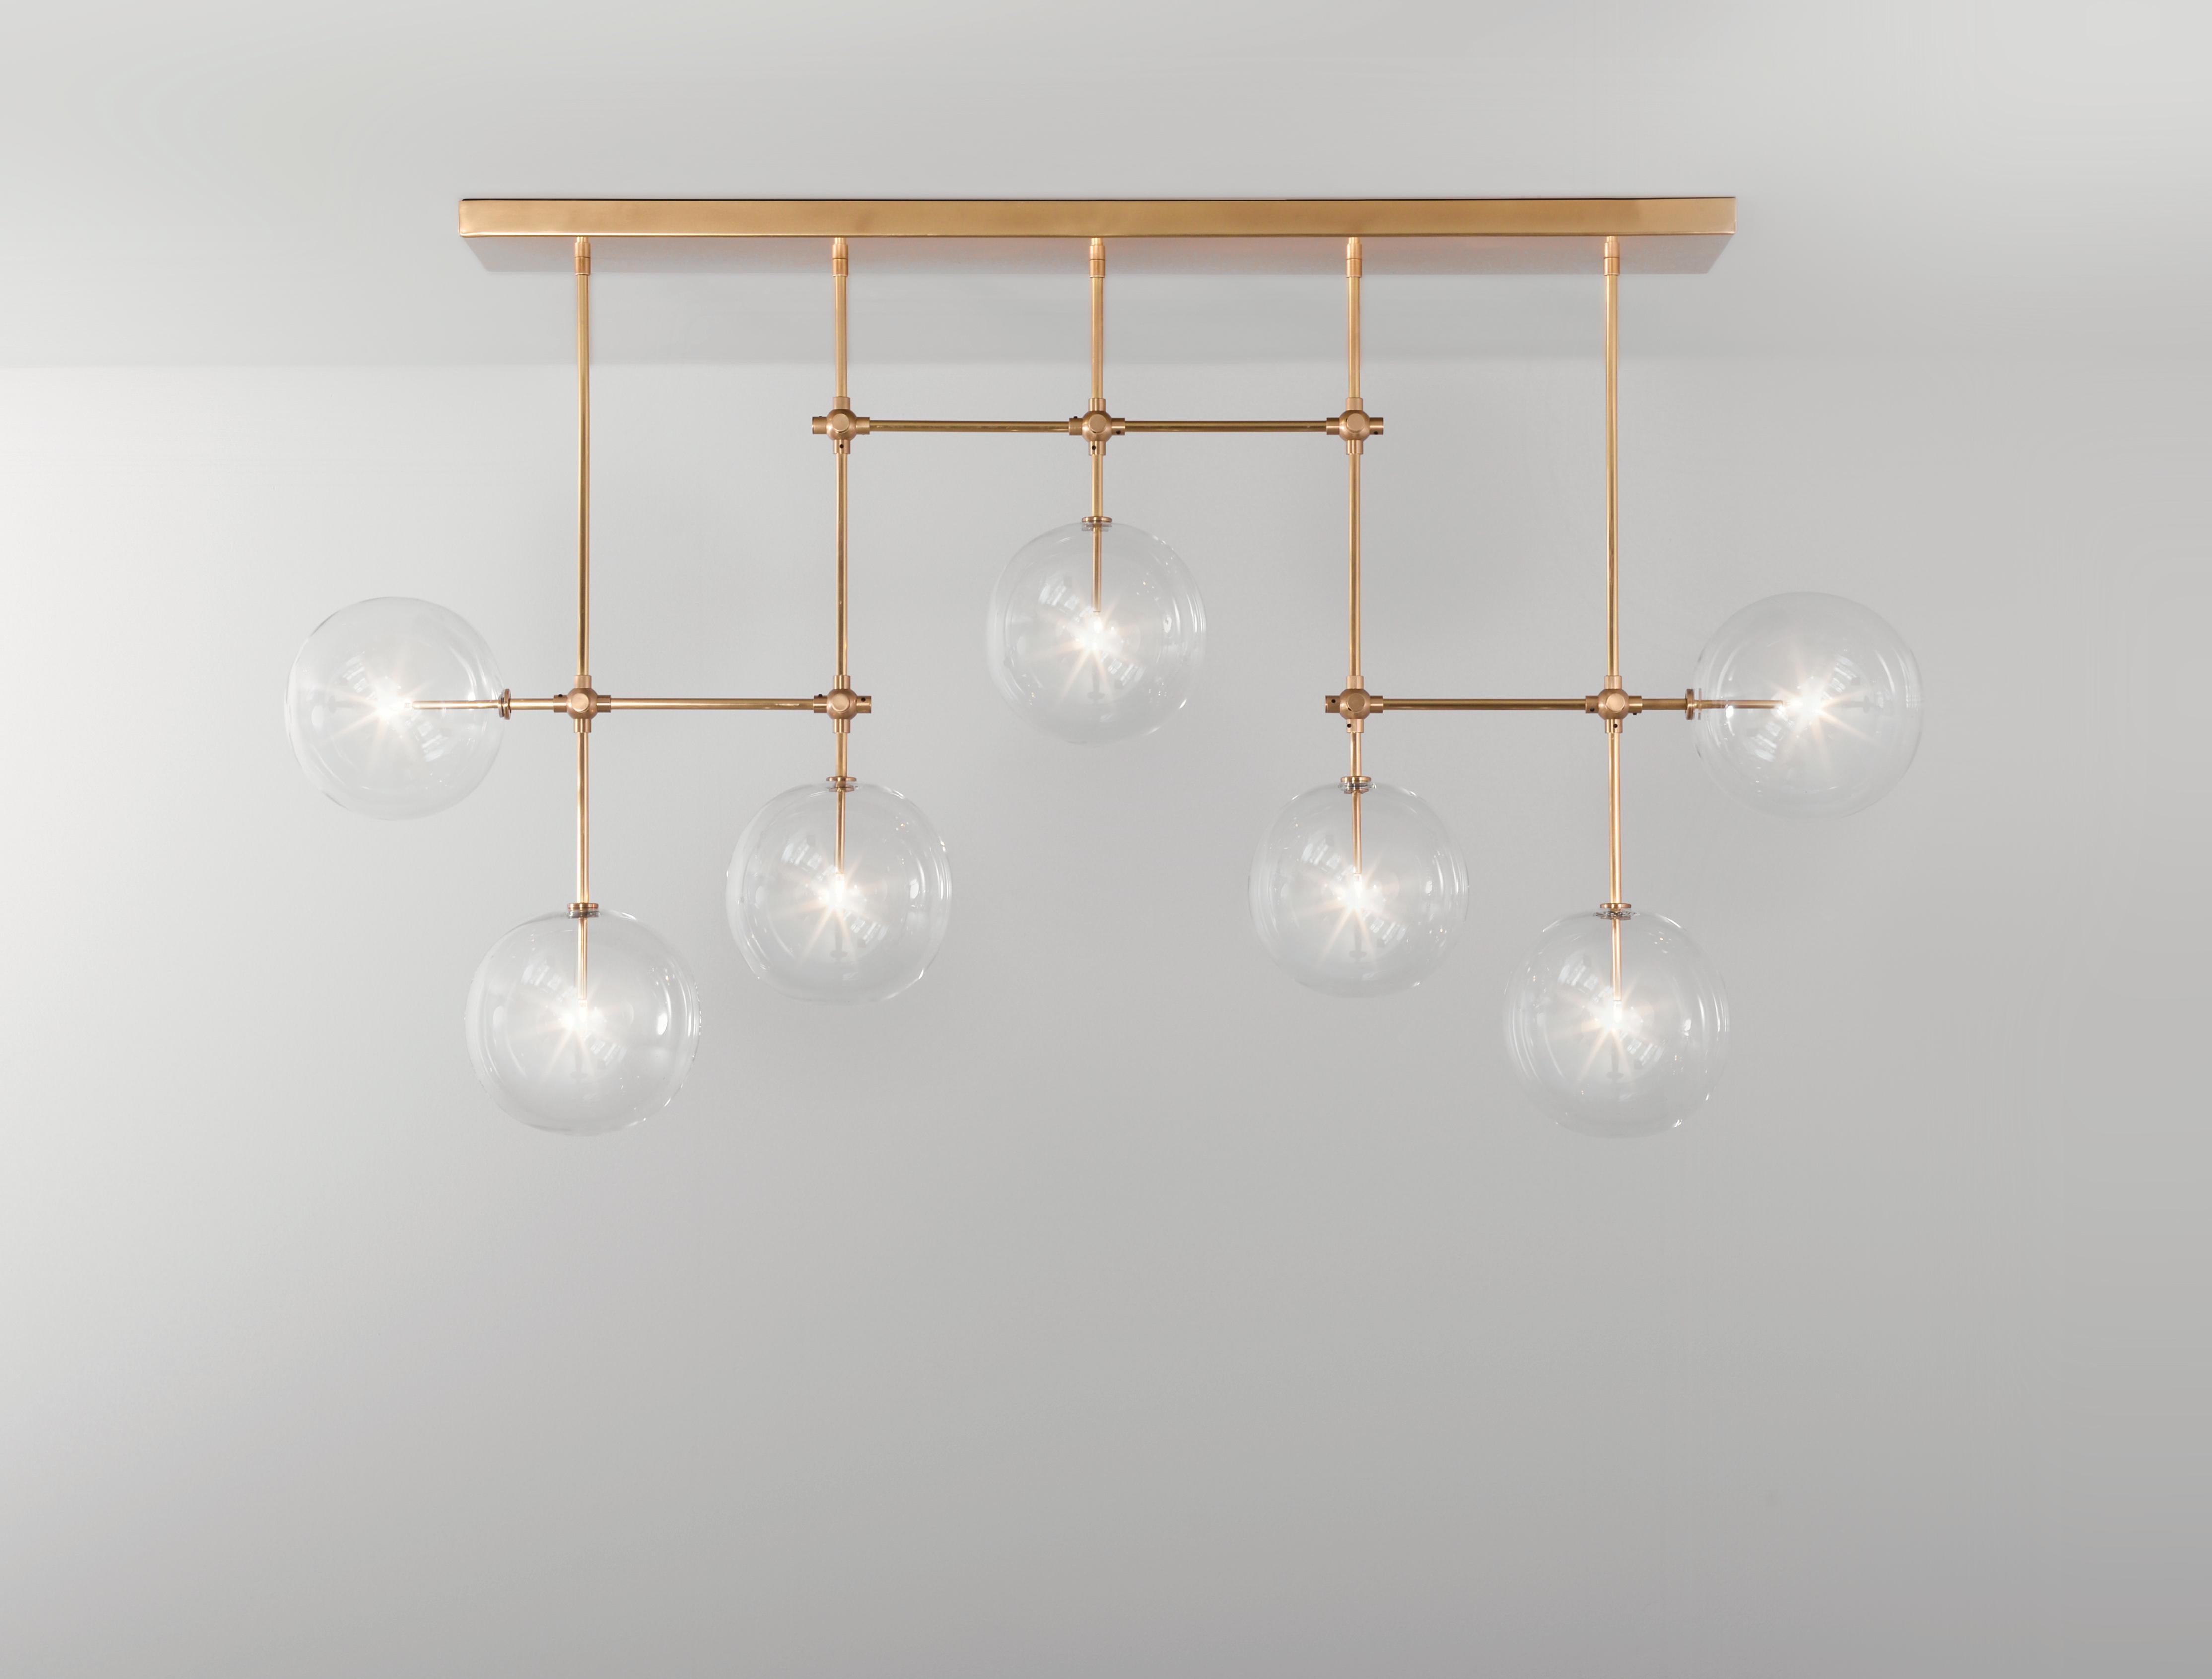 Soap B7 MD Brass chandelier by Schwung
Dimensions: W 150 x D 23 x H 83.4 cm
Materials: Solid brass, hand blown glass globes

Max wattage: 1.6W
Bulb base: G4, 12V AC
Lumens: 600lm
Colour temperature: 2700k
Maximum bulb diameter: 10mm
Also available